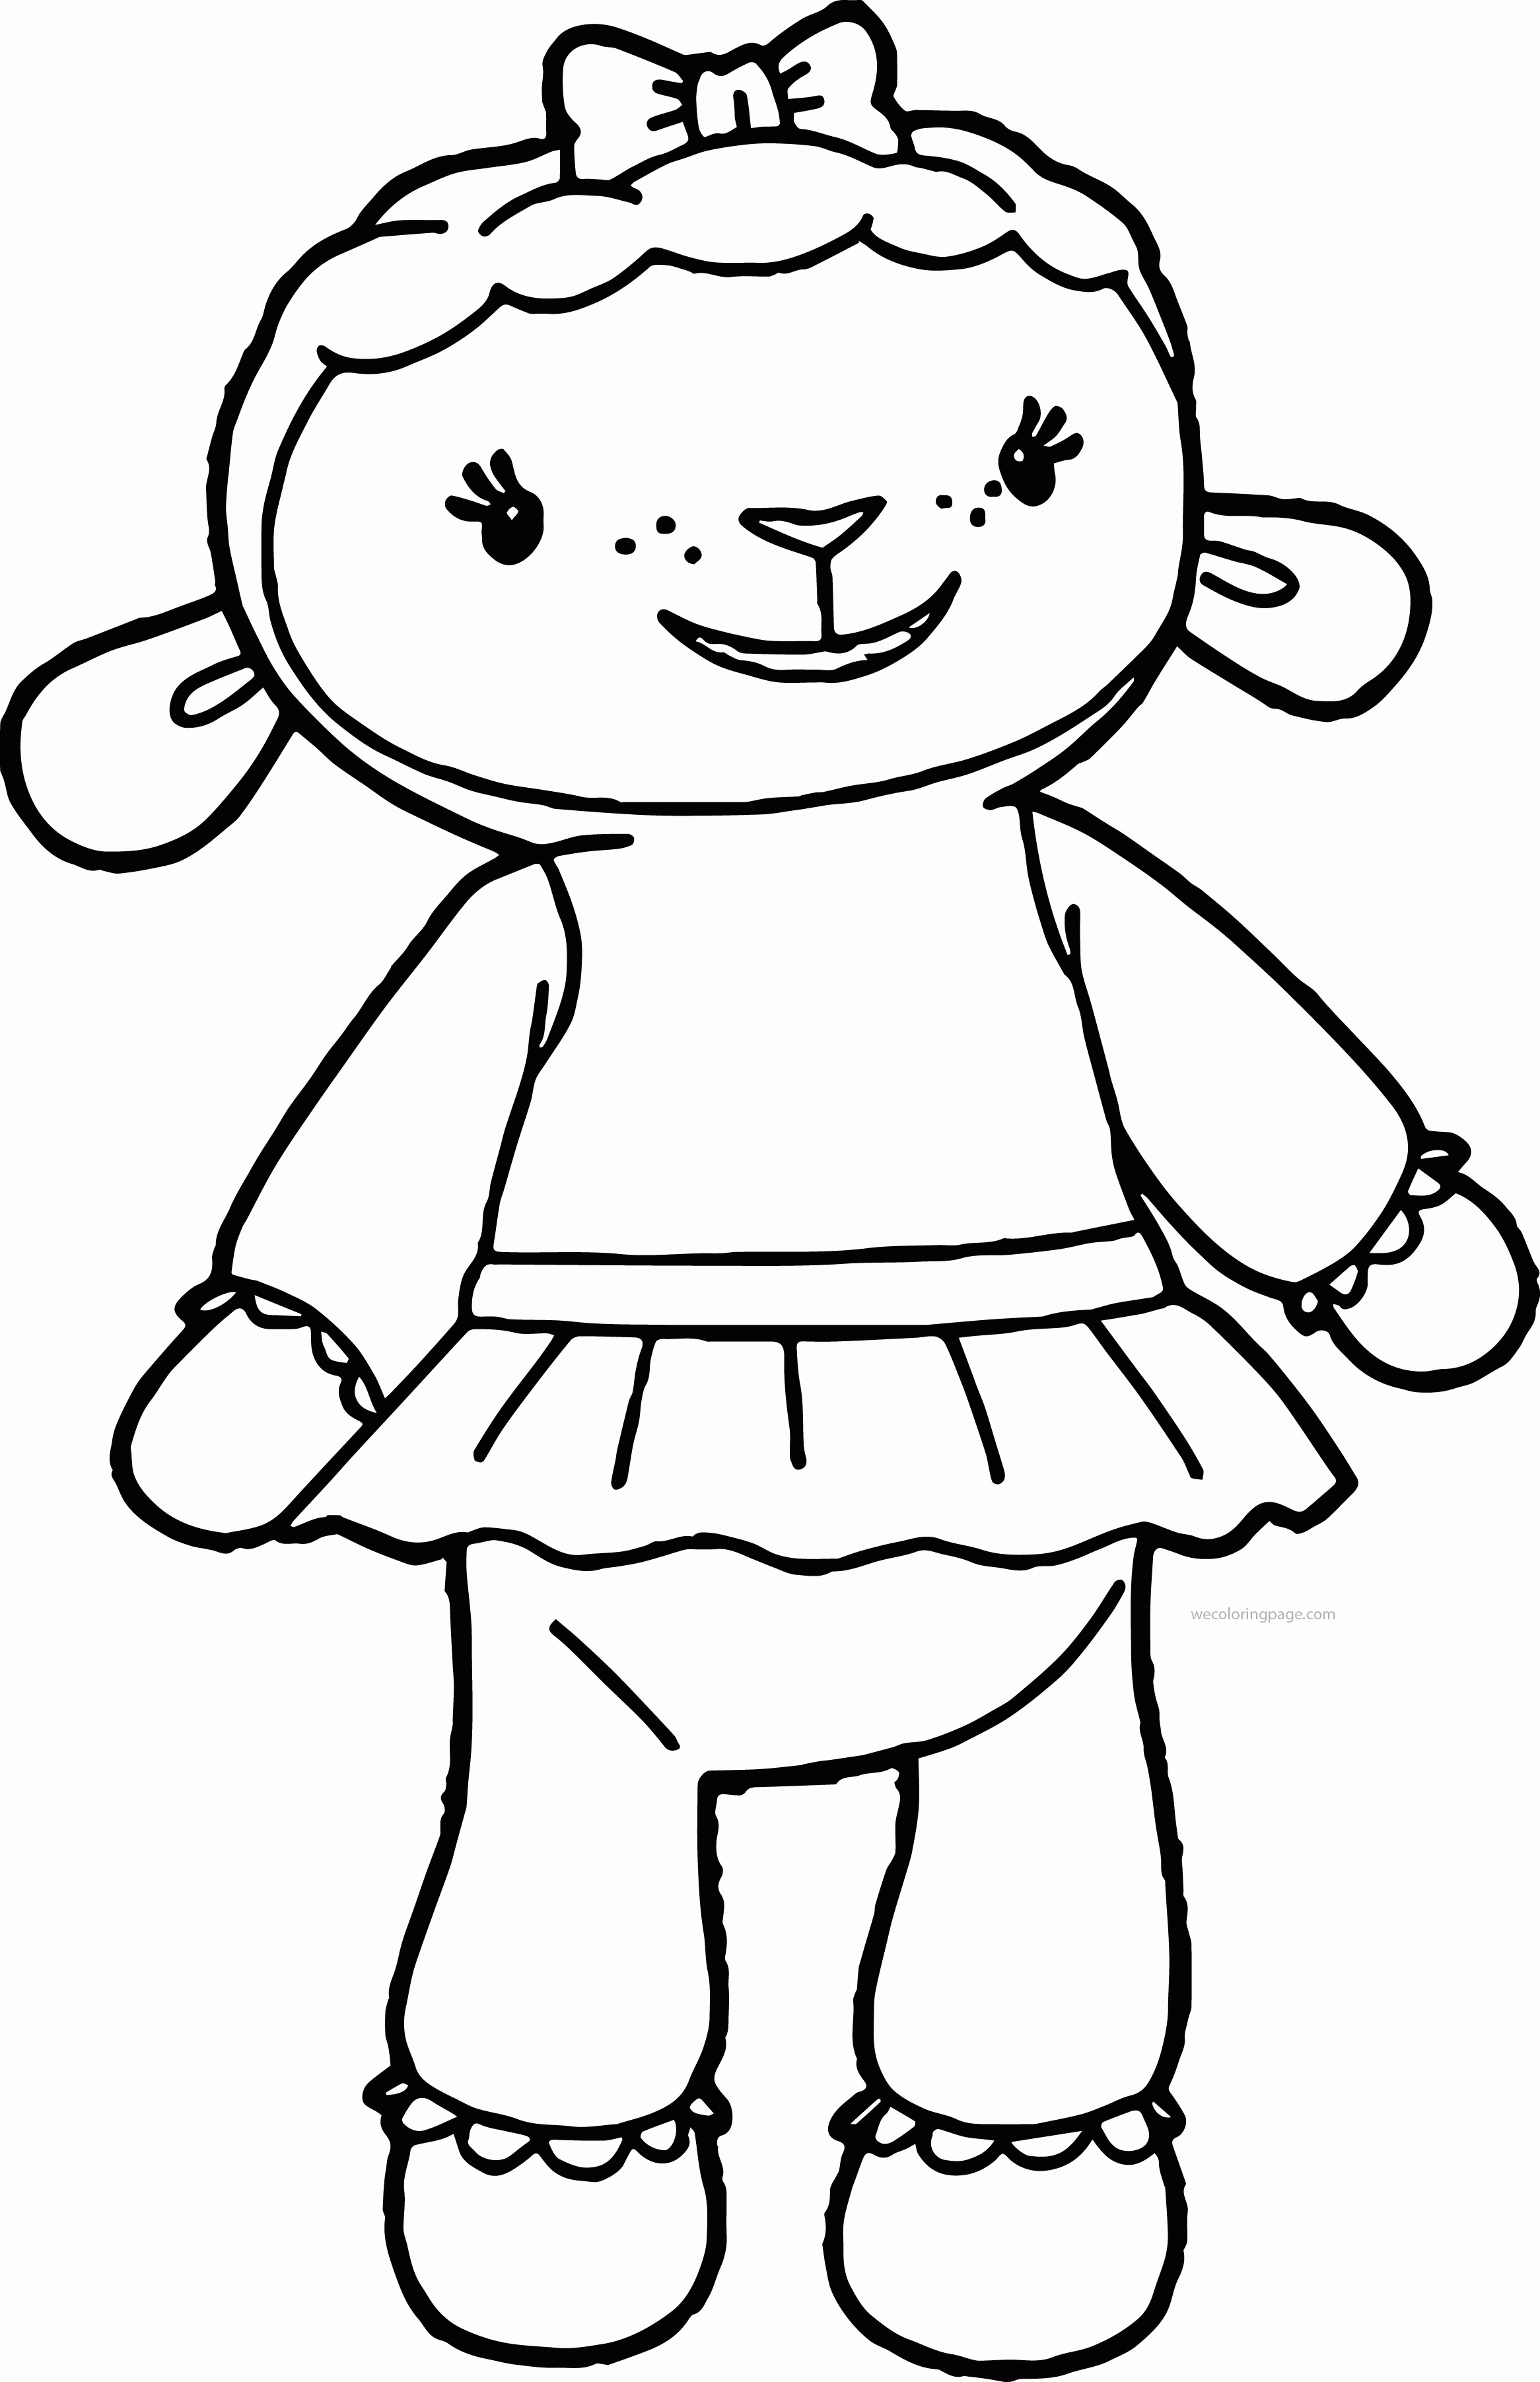 Doc McStuffins Lambie Sheep Coloring Page Wecoloringpage Coloring Home